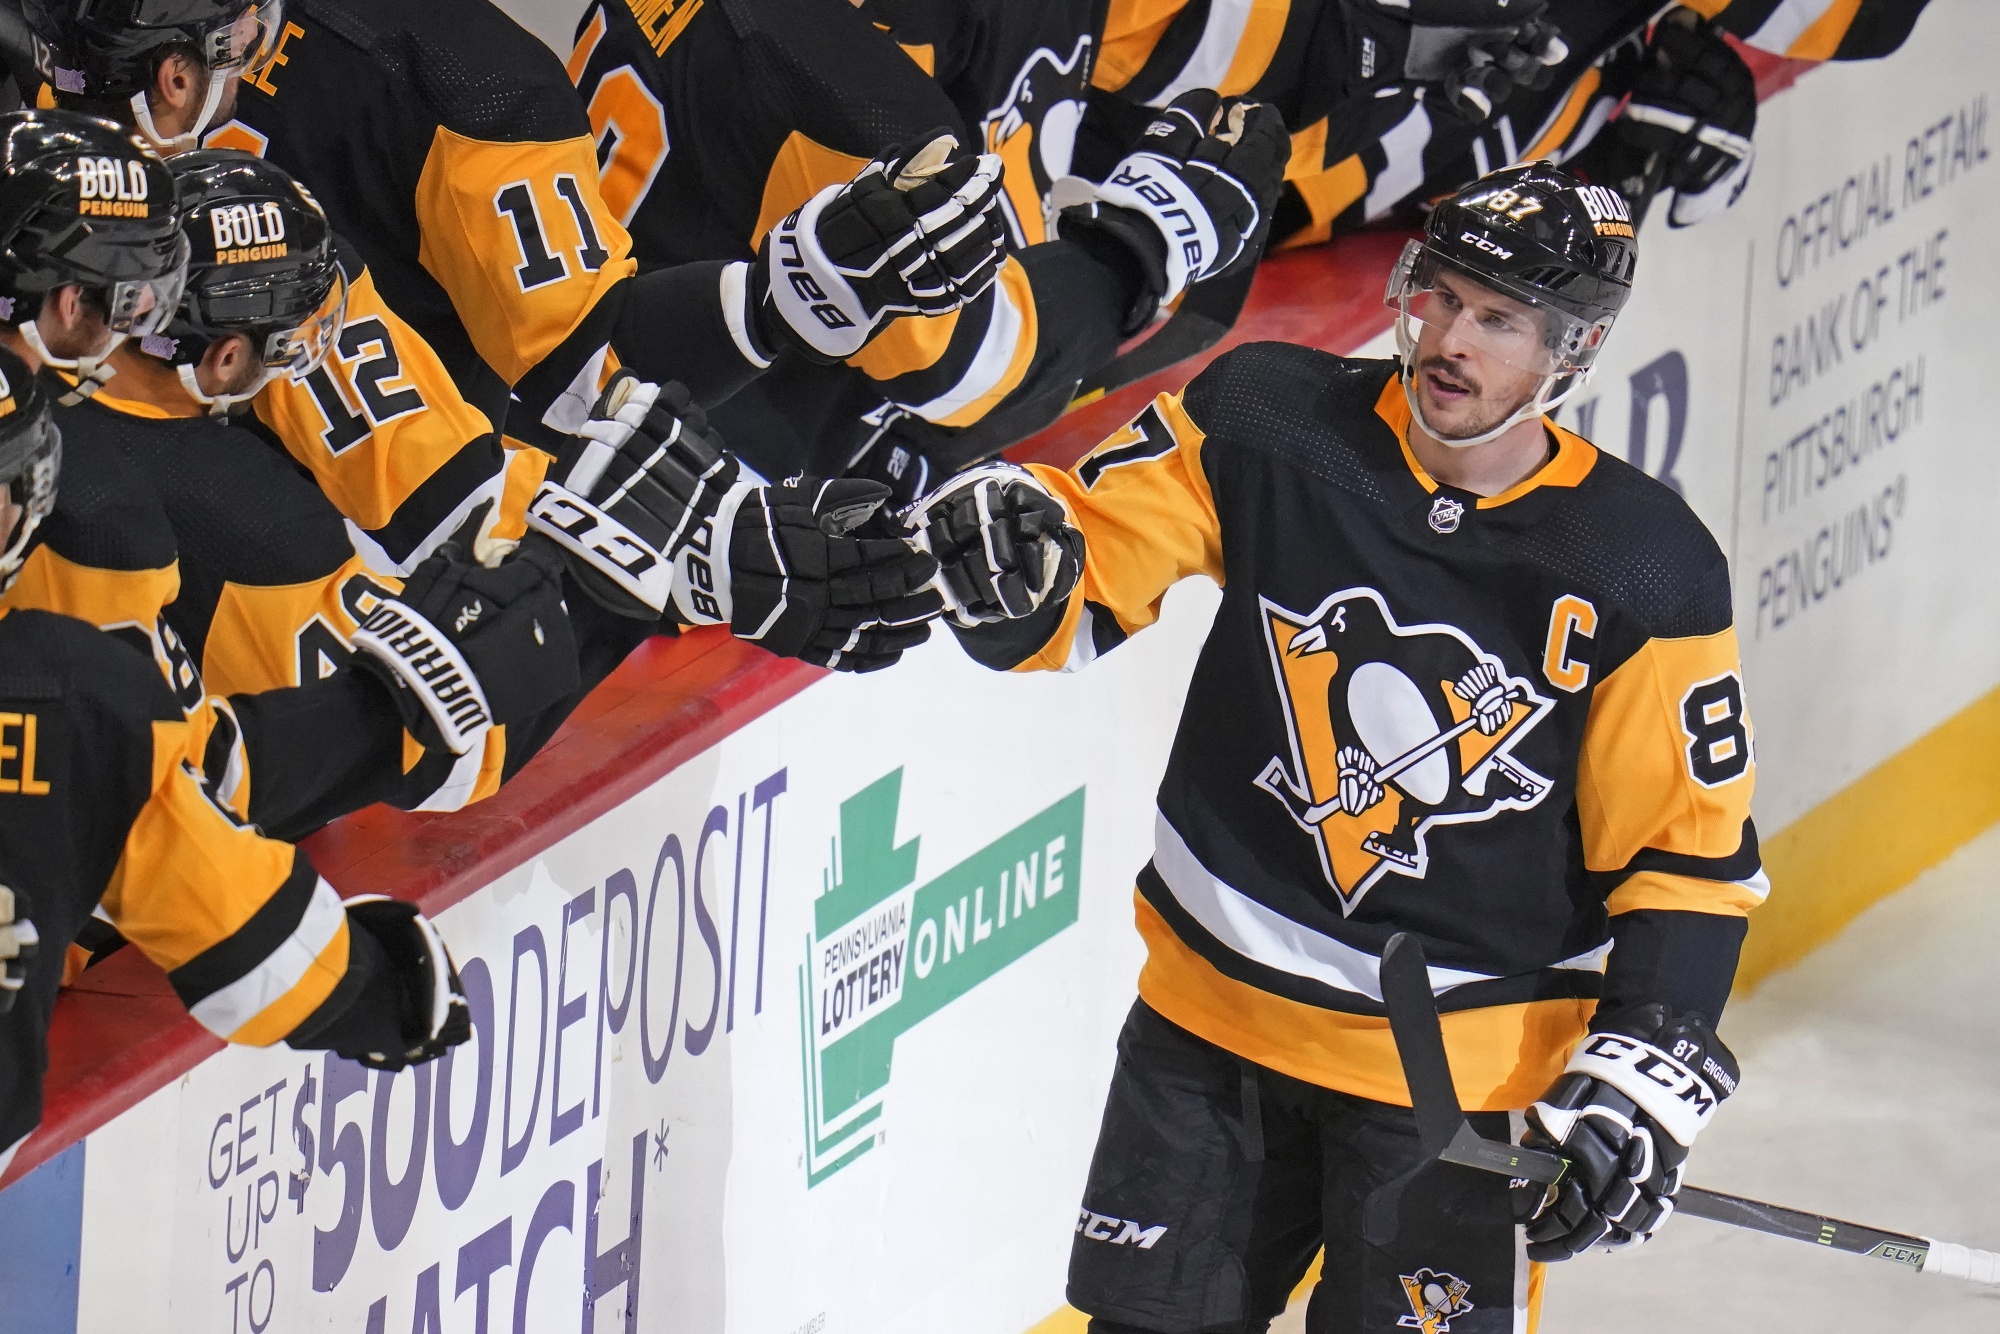 Where it went off the rails for Ron Hextall and the Penguins - PensBurgh